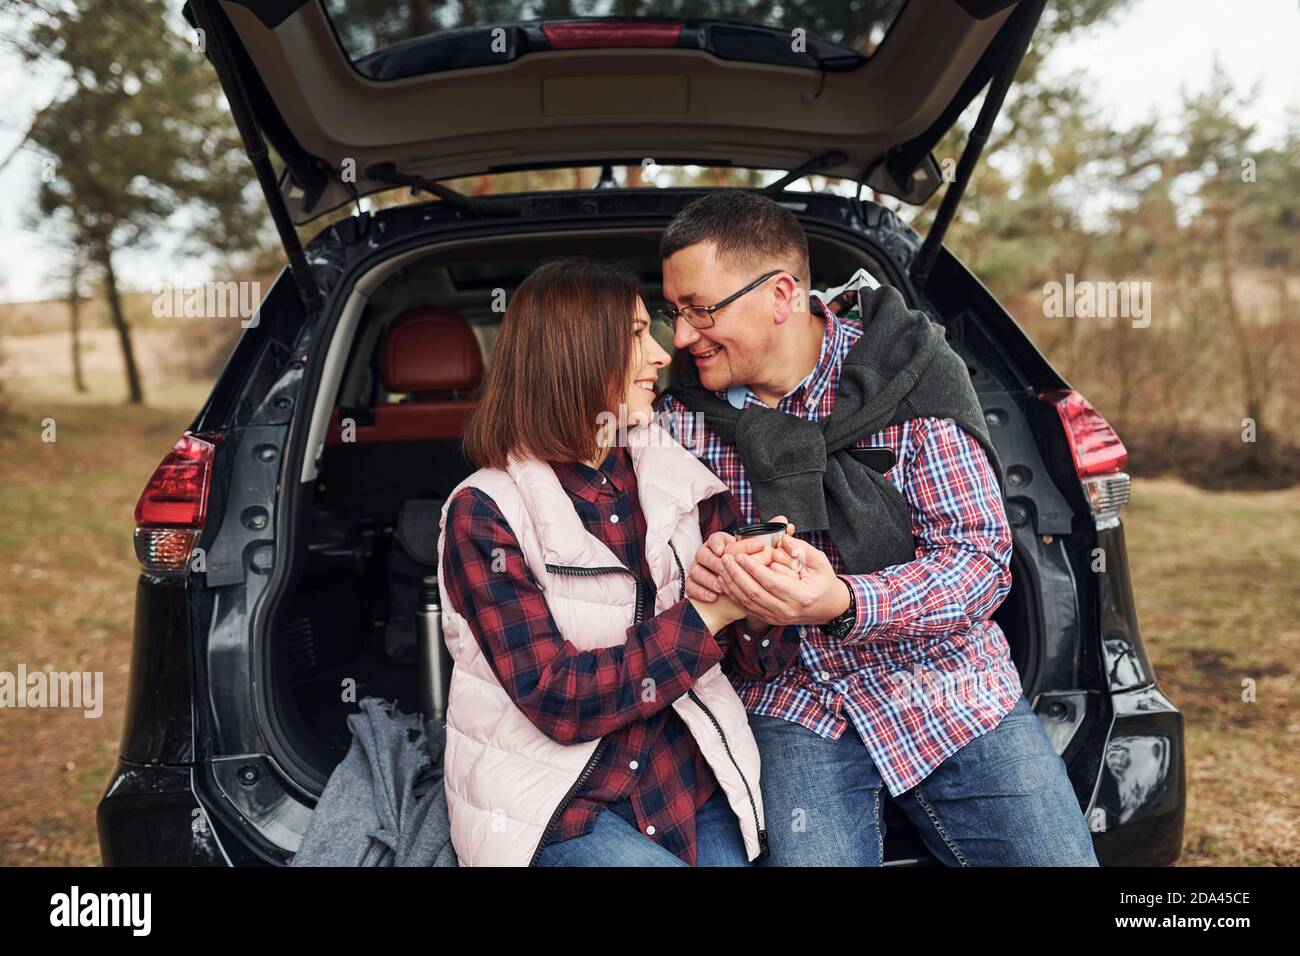 Happy mature couple sitting together on the back of a car outdoors in forest Stock Photo